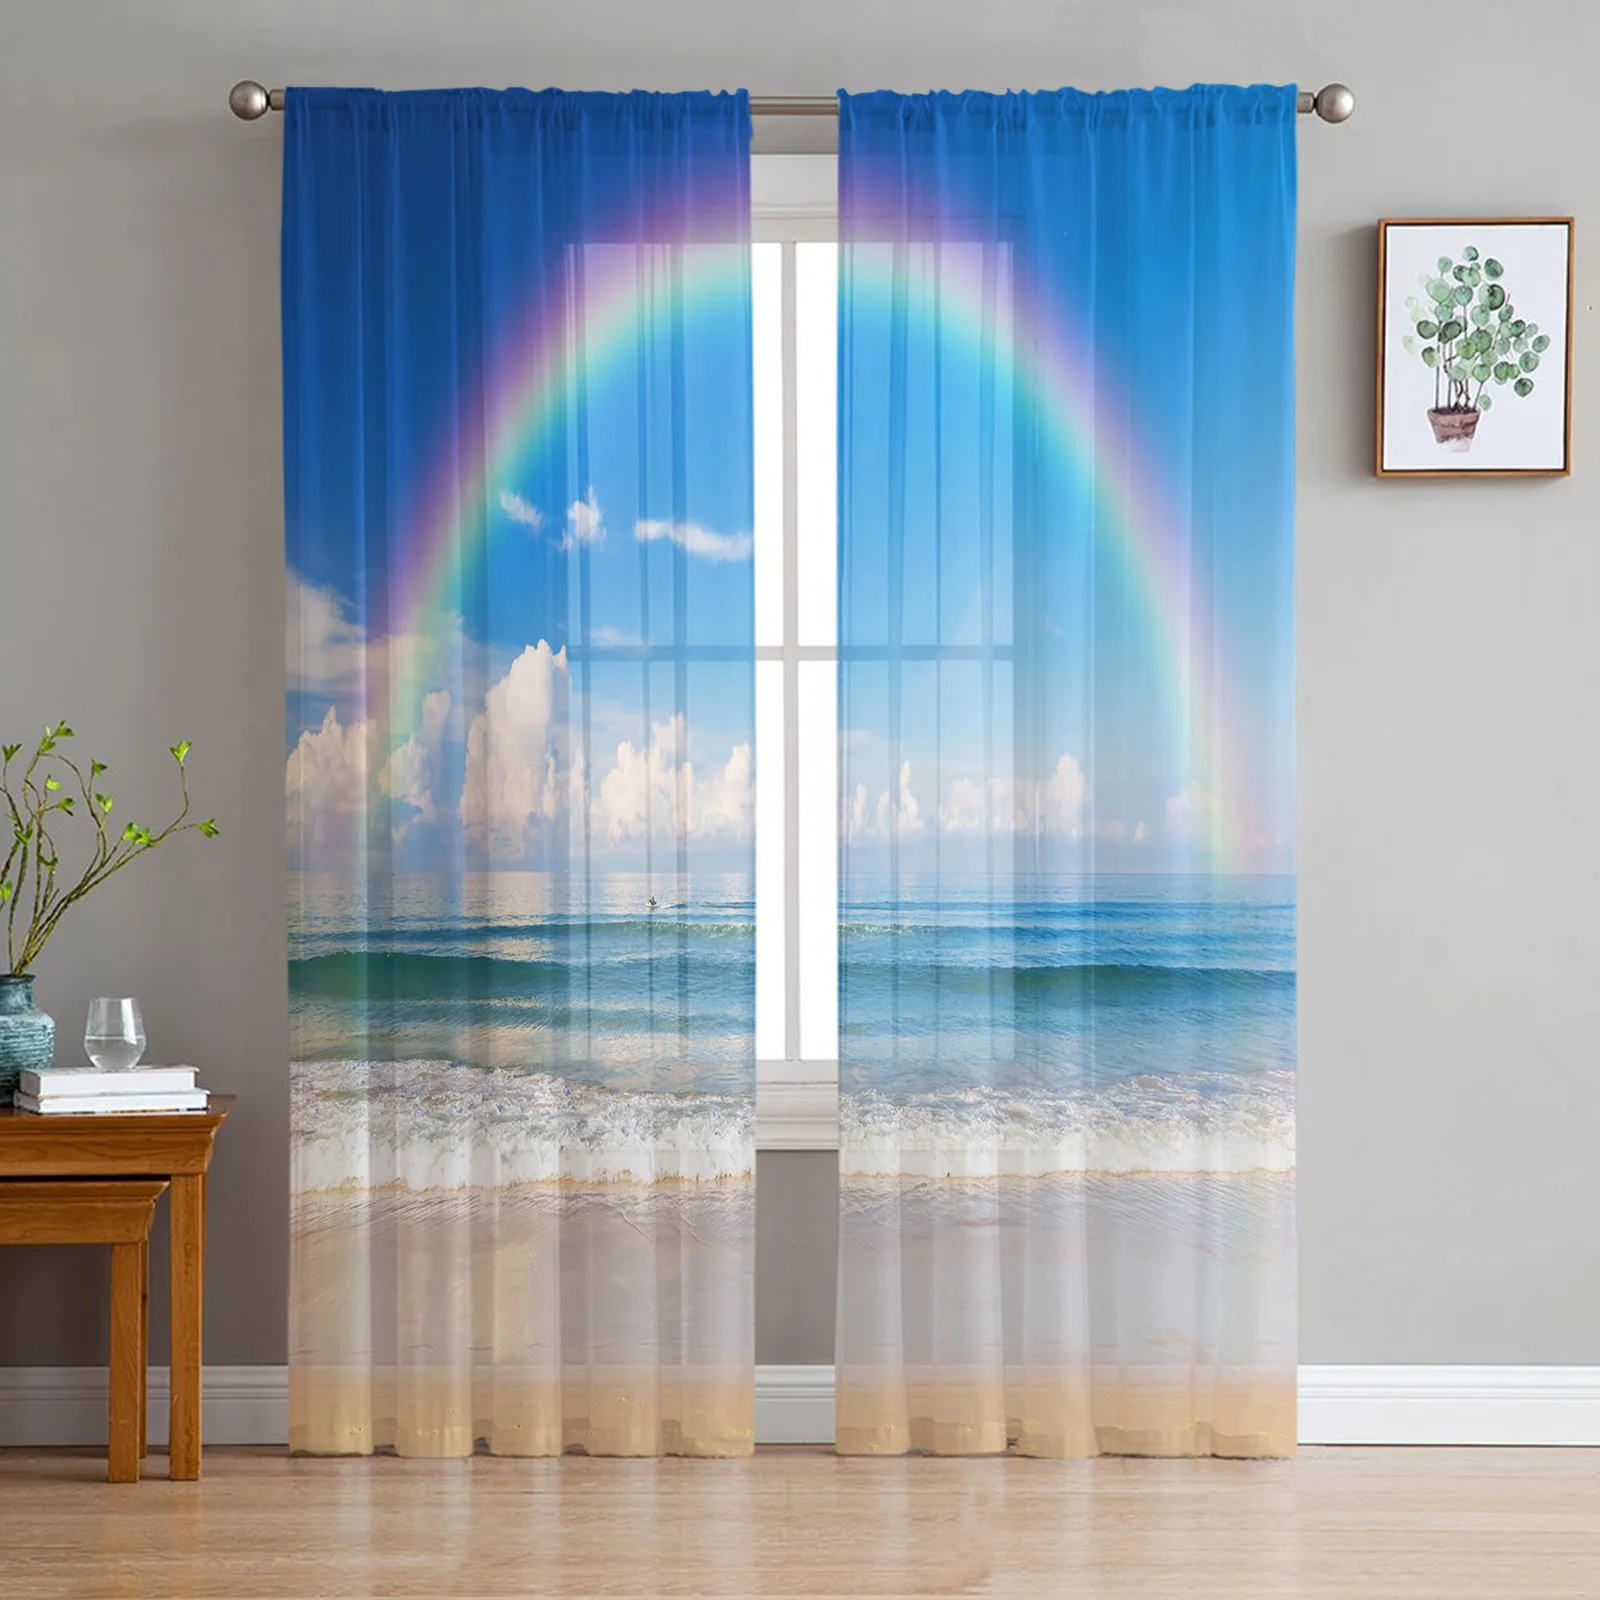 Rainbow Seaside Beach Blue Sky Sheer Curtains Living Room Window Tulle Curtains For Bedroom Kitchen Home Decoration Voile Drapes